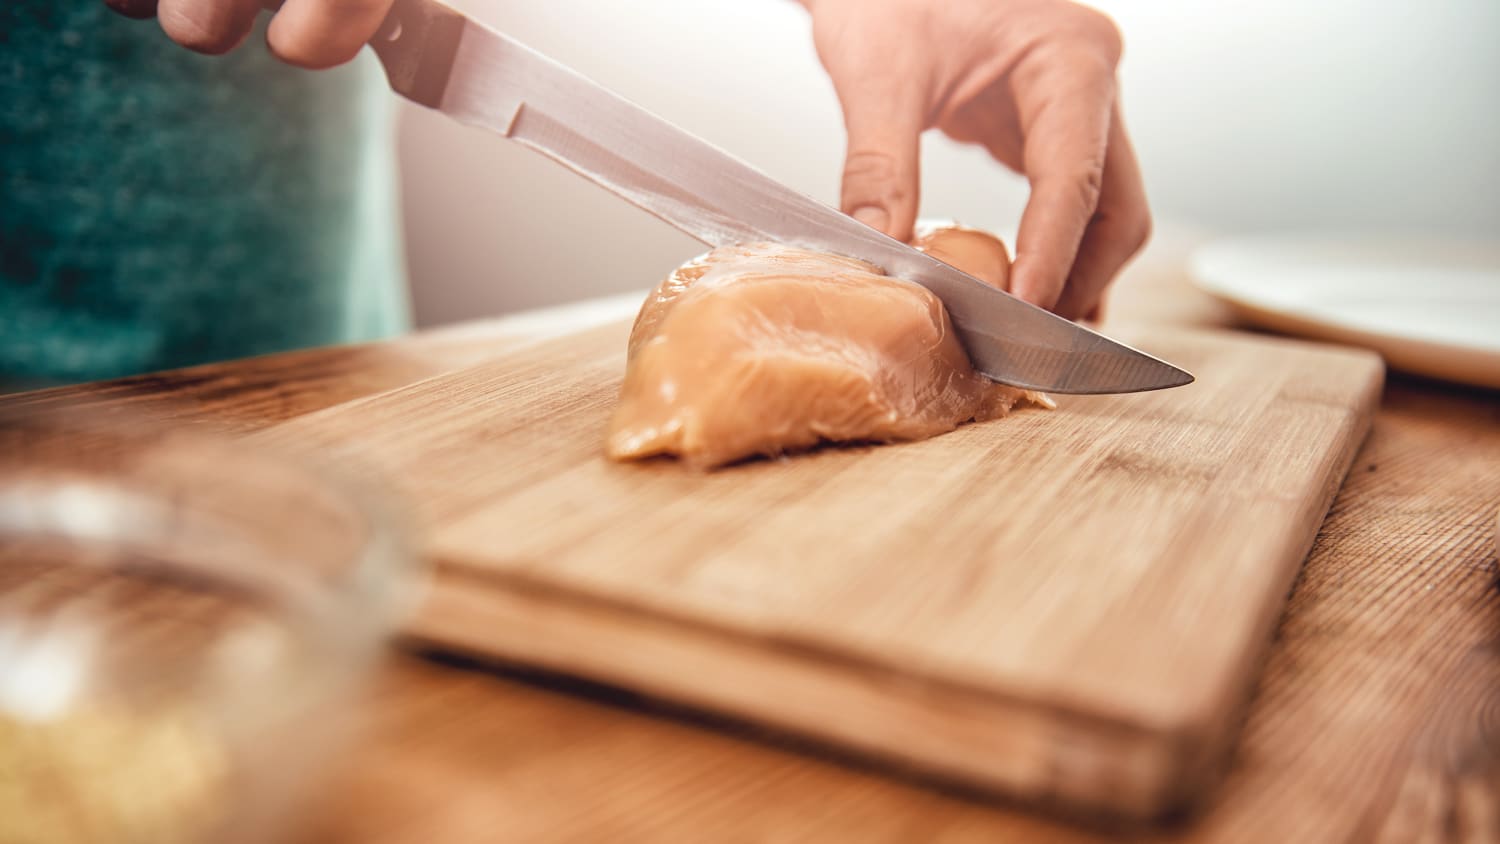 https://media-cldnry.s-nbcnews.com/image/upload/newscms/2018_16/1332490/raw-chicken-cutting-board-stock-today-180417-tease.jpg